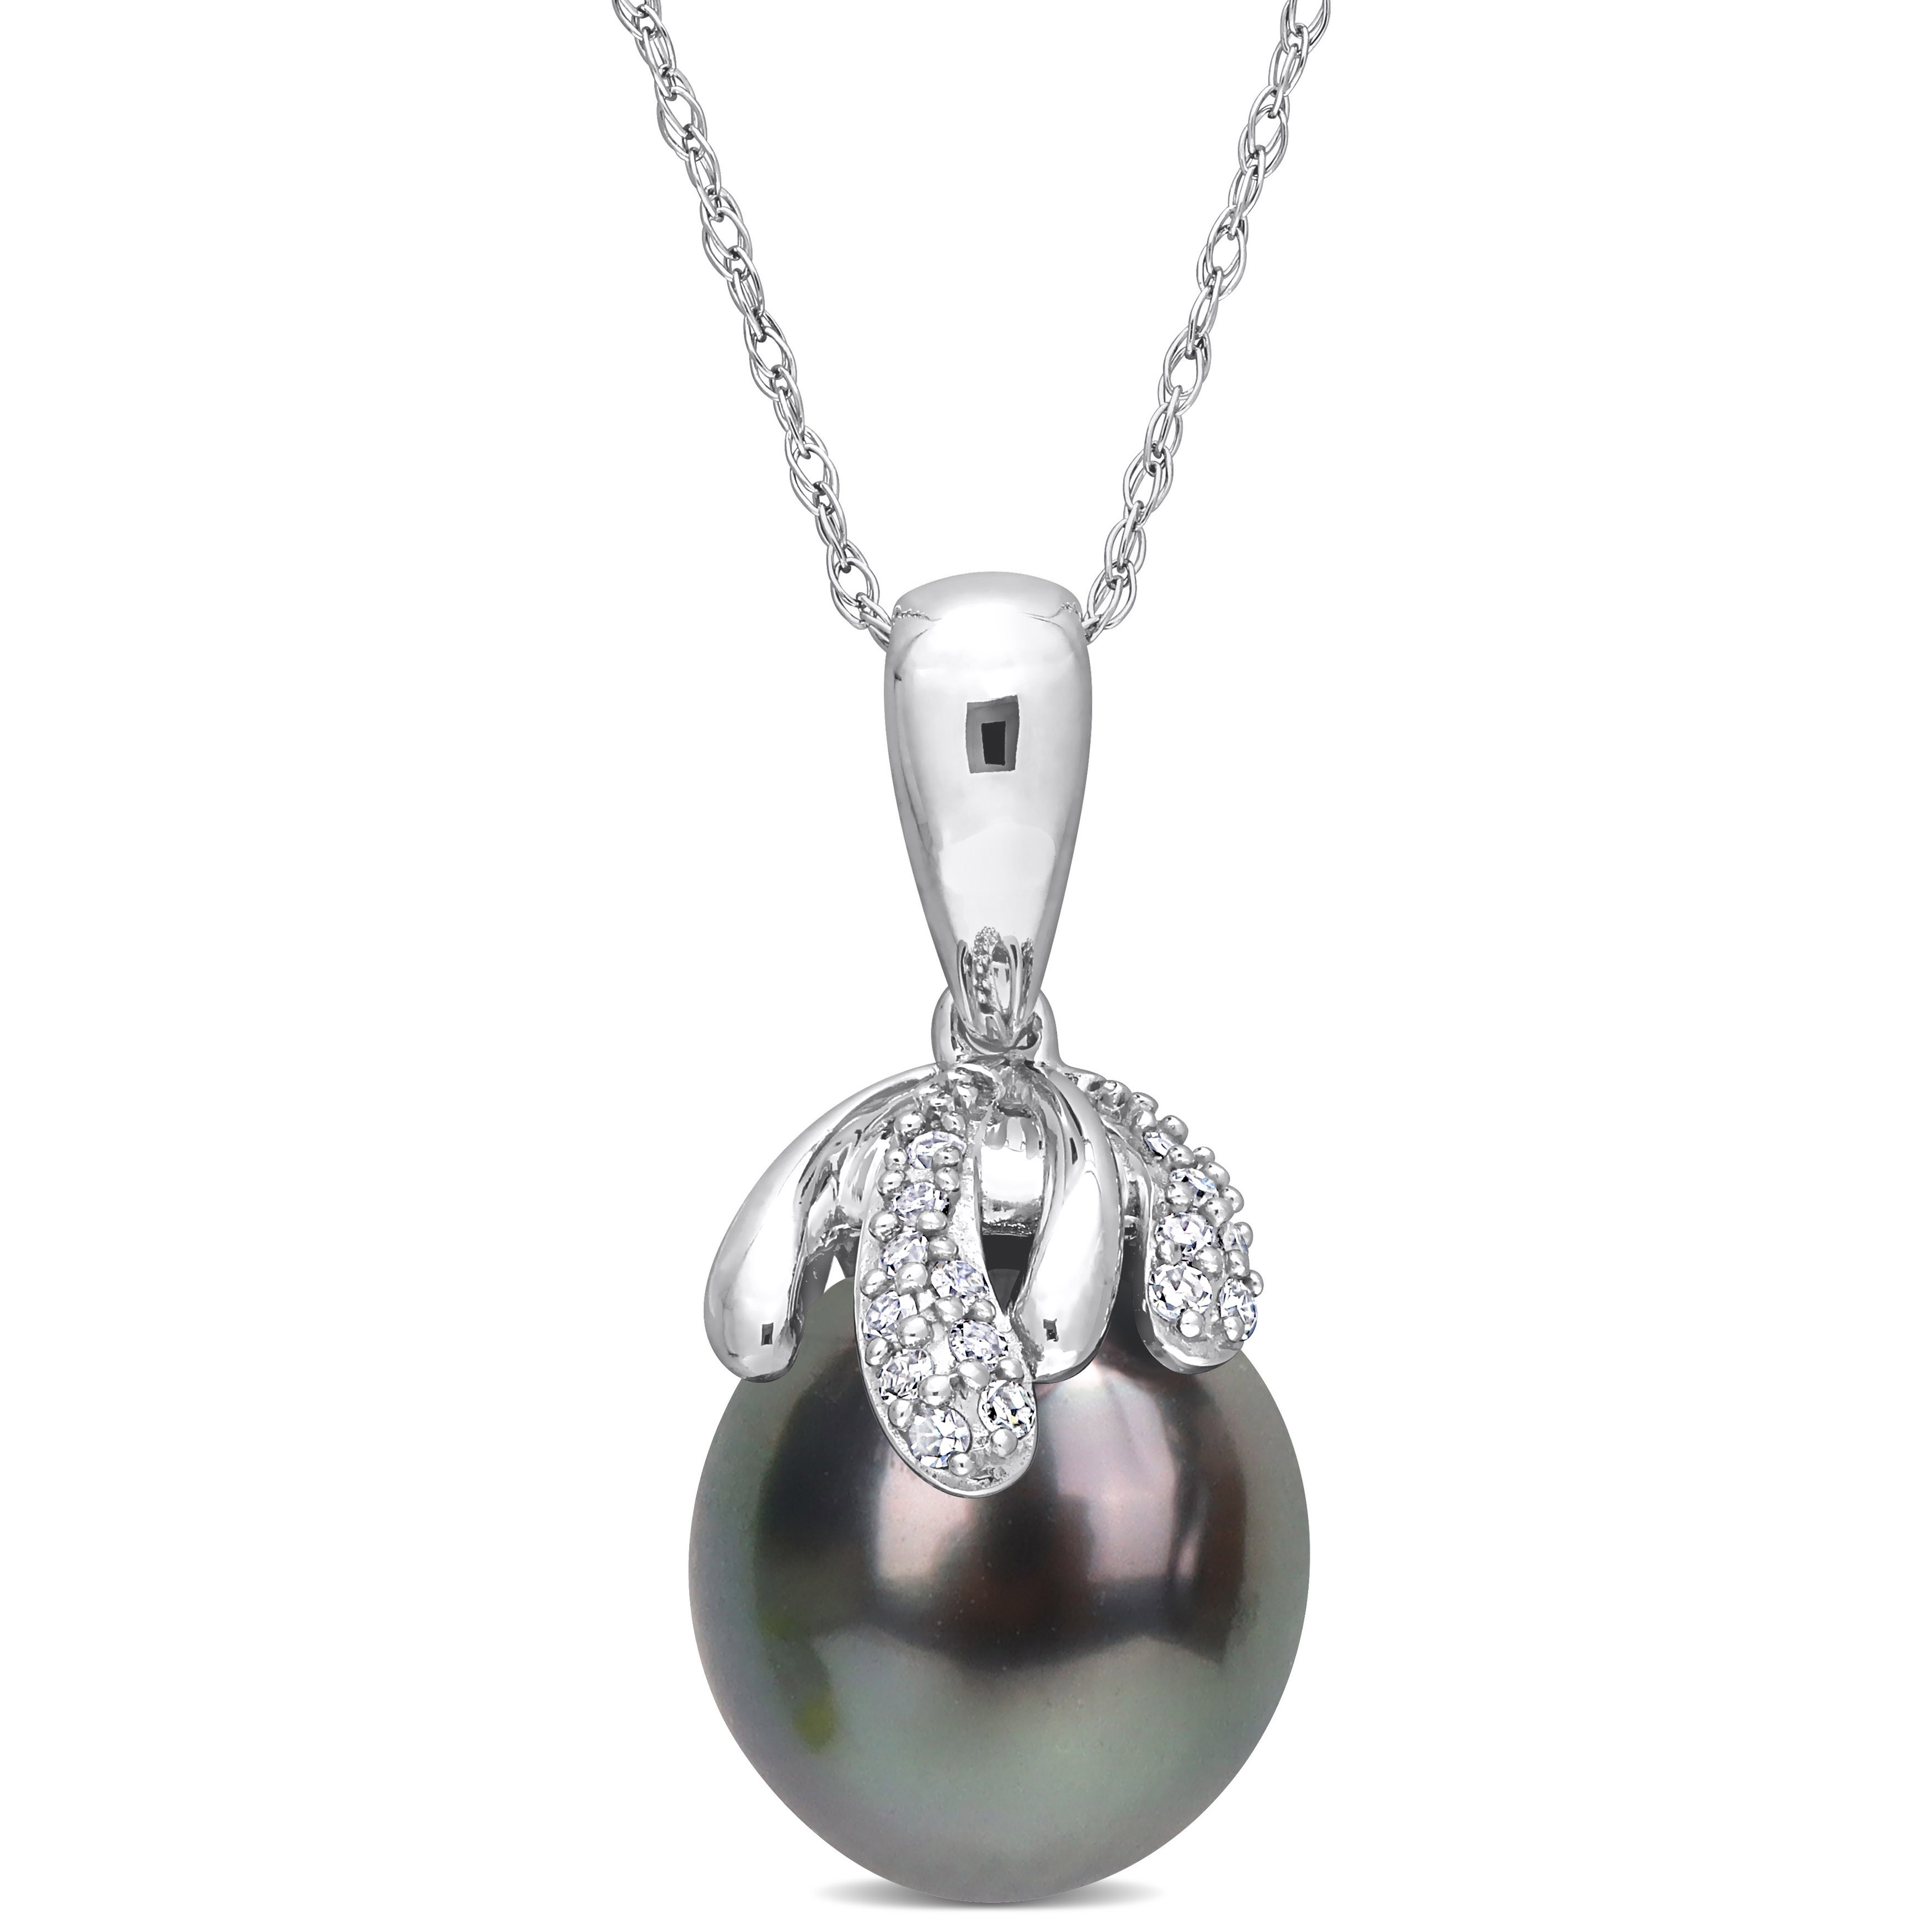 9-10 MM Black Tahitian Cultured Pearl & Diamond Accent Pendant with Chain in 14k White Gold - 17 in.